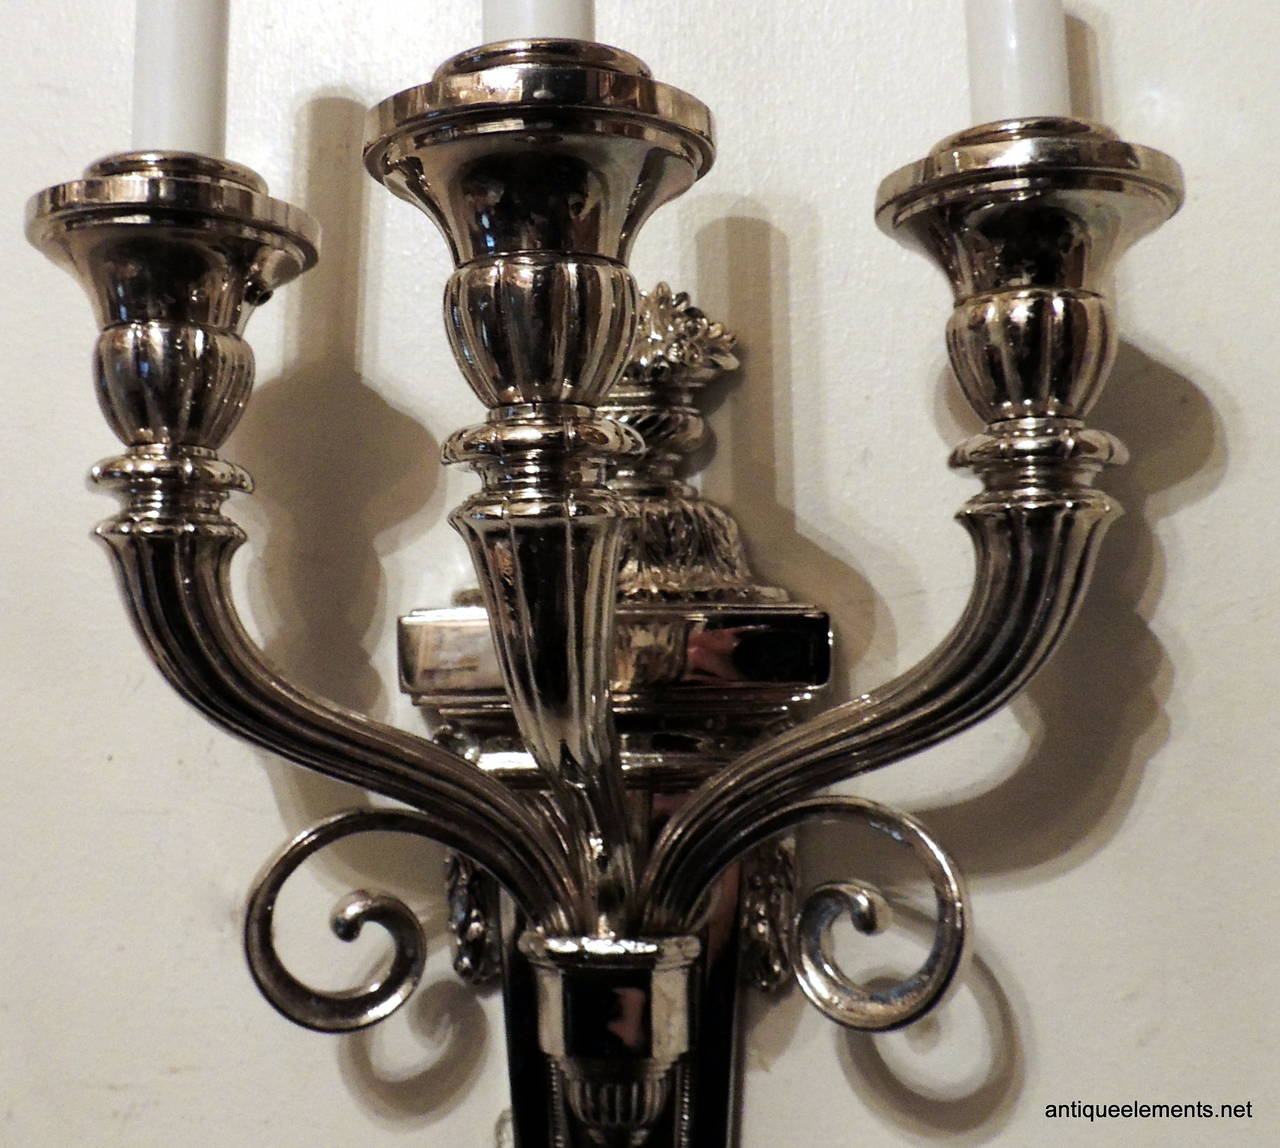 Neoclassical Nickel-Plated Three-Arm Sconces Attributed to Caldwell For Sale 2